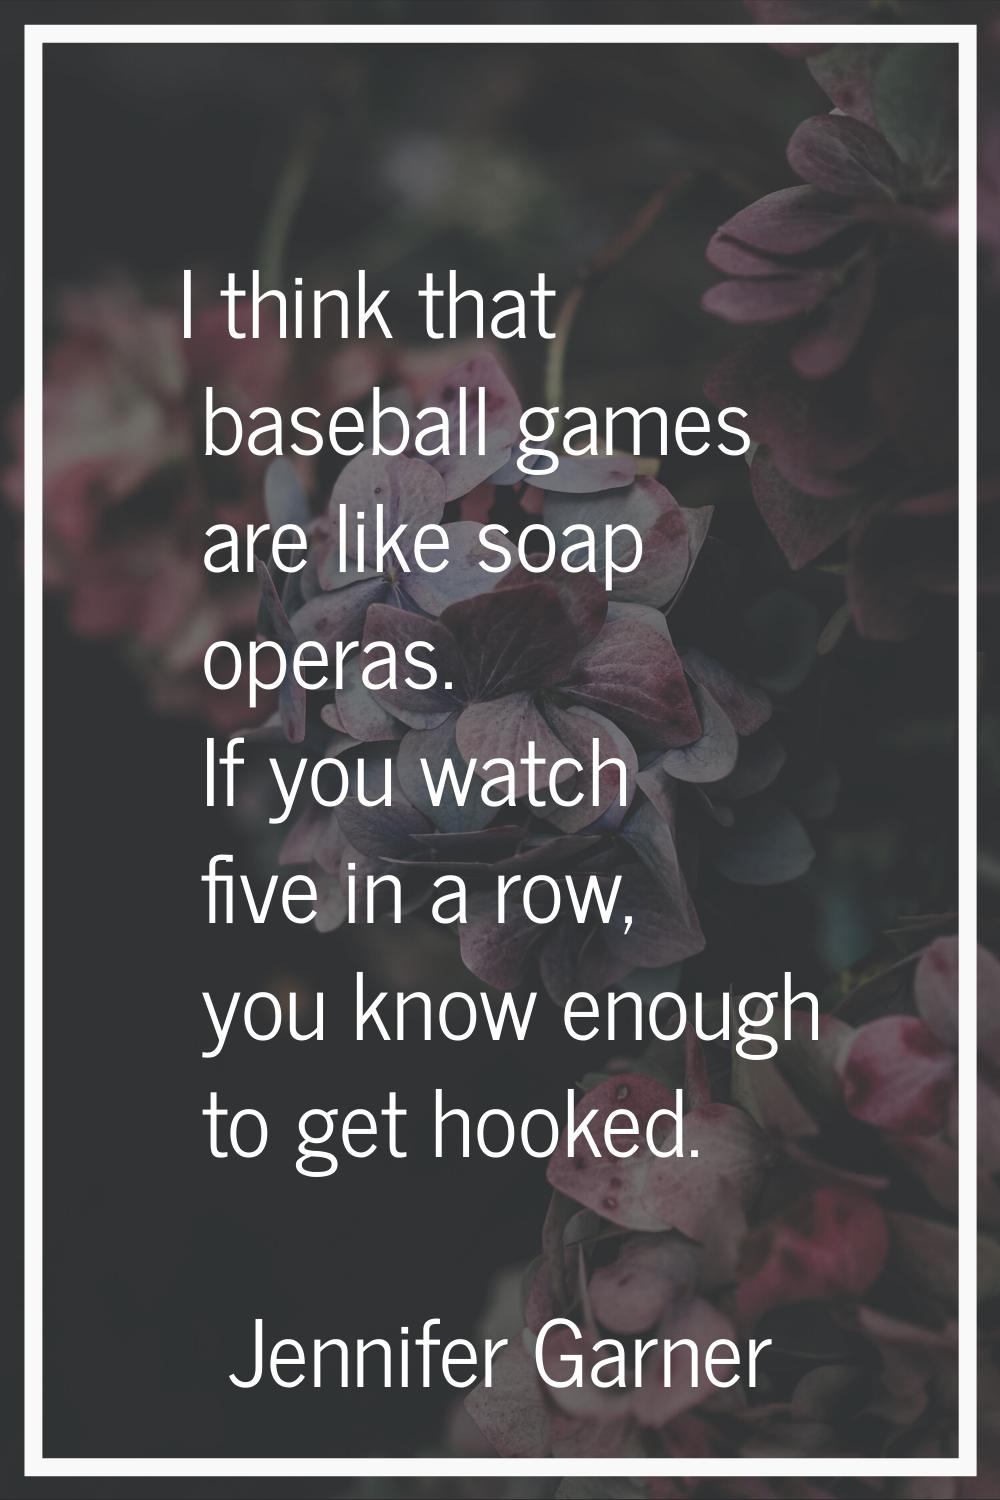 I think that baseball games are like soap operas. If you watch five in a row, you know enough to ge